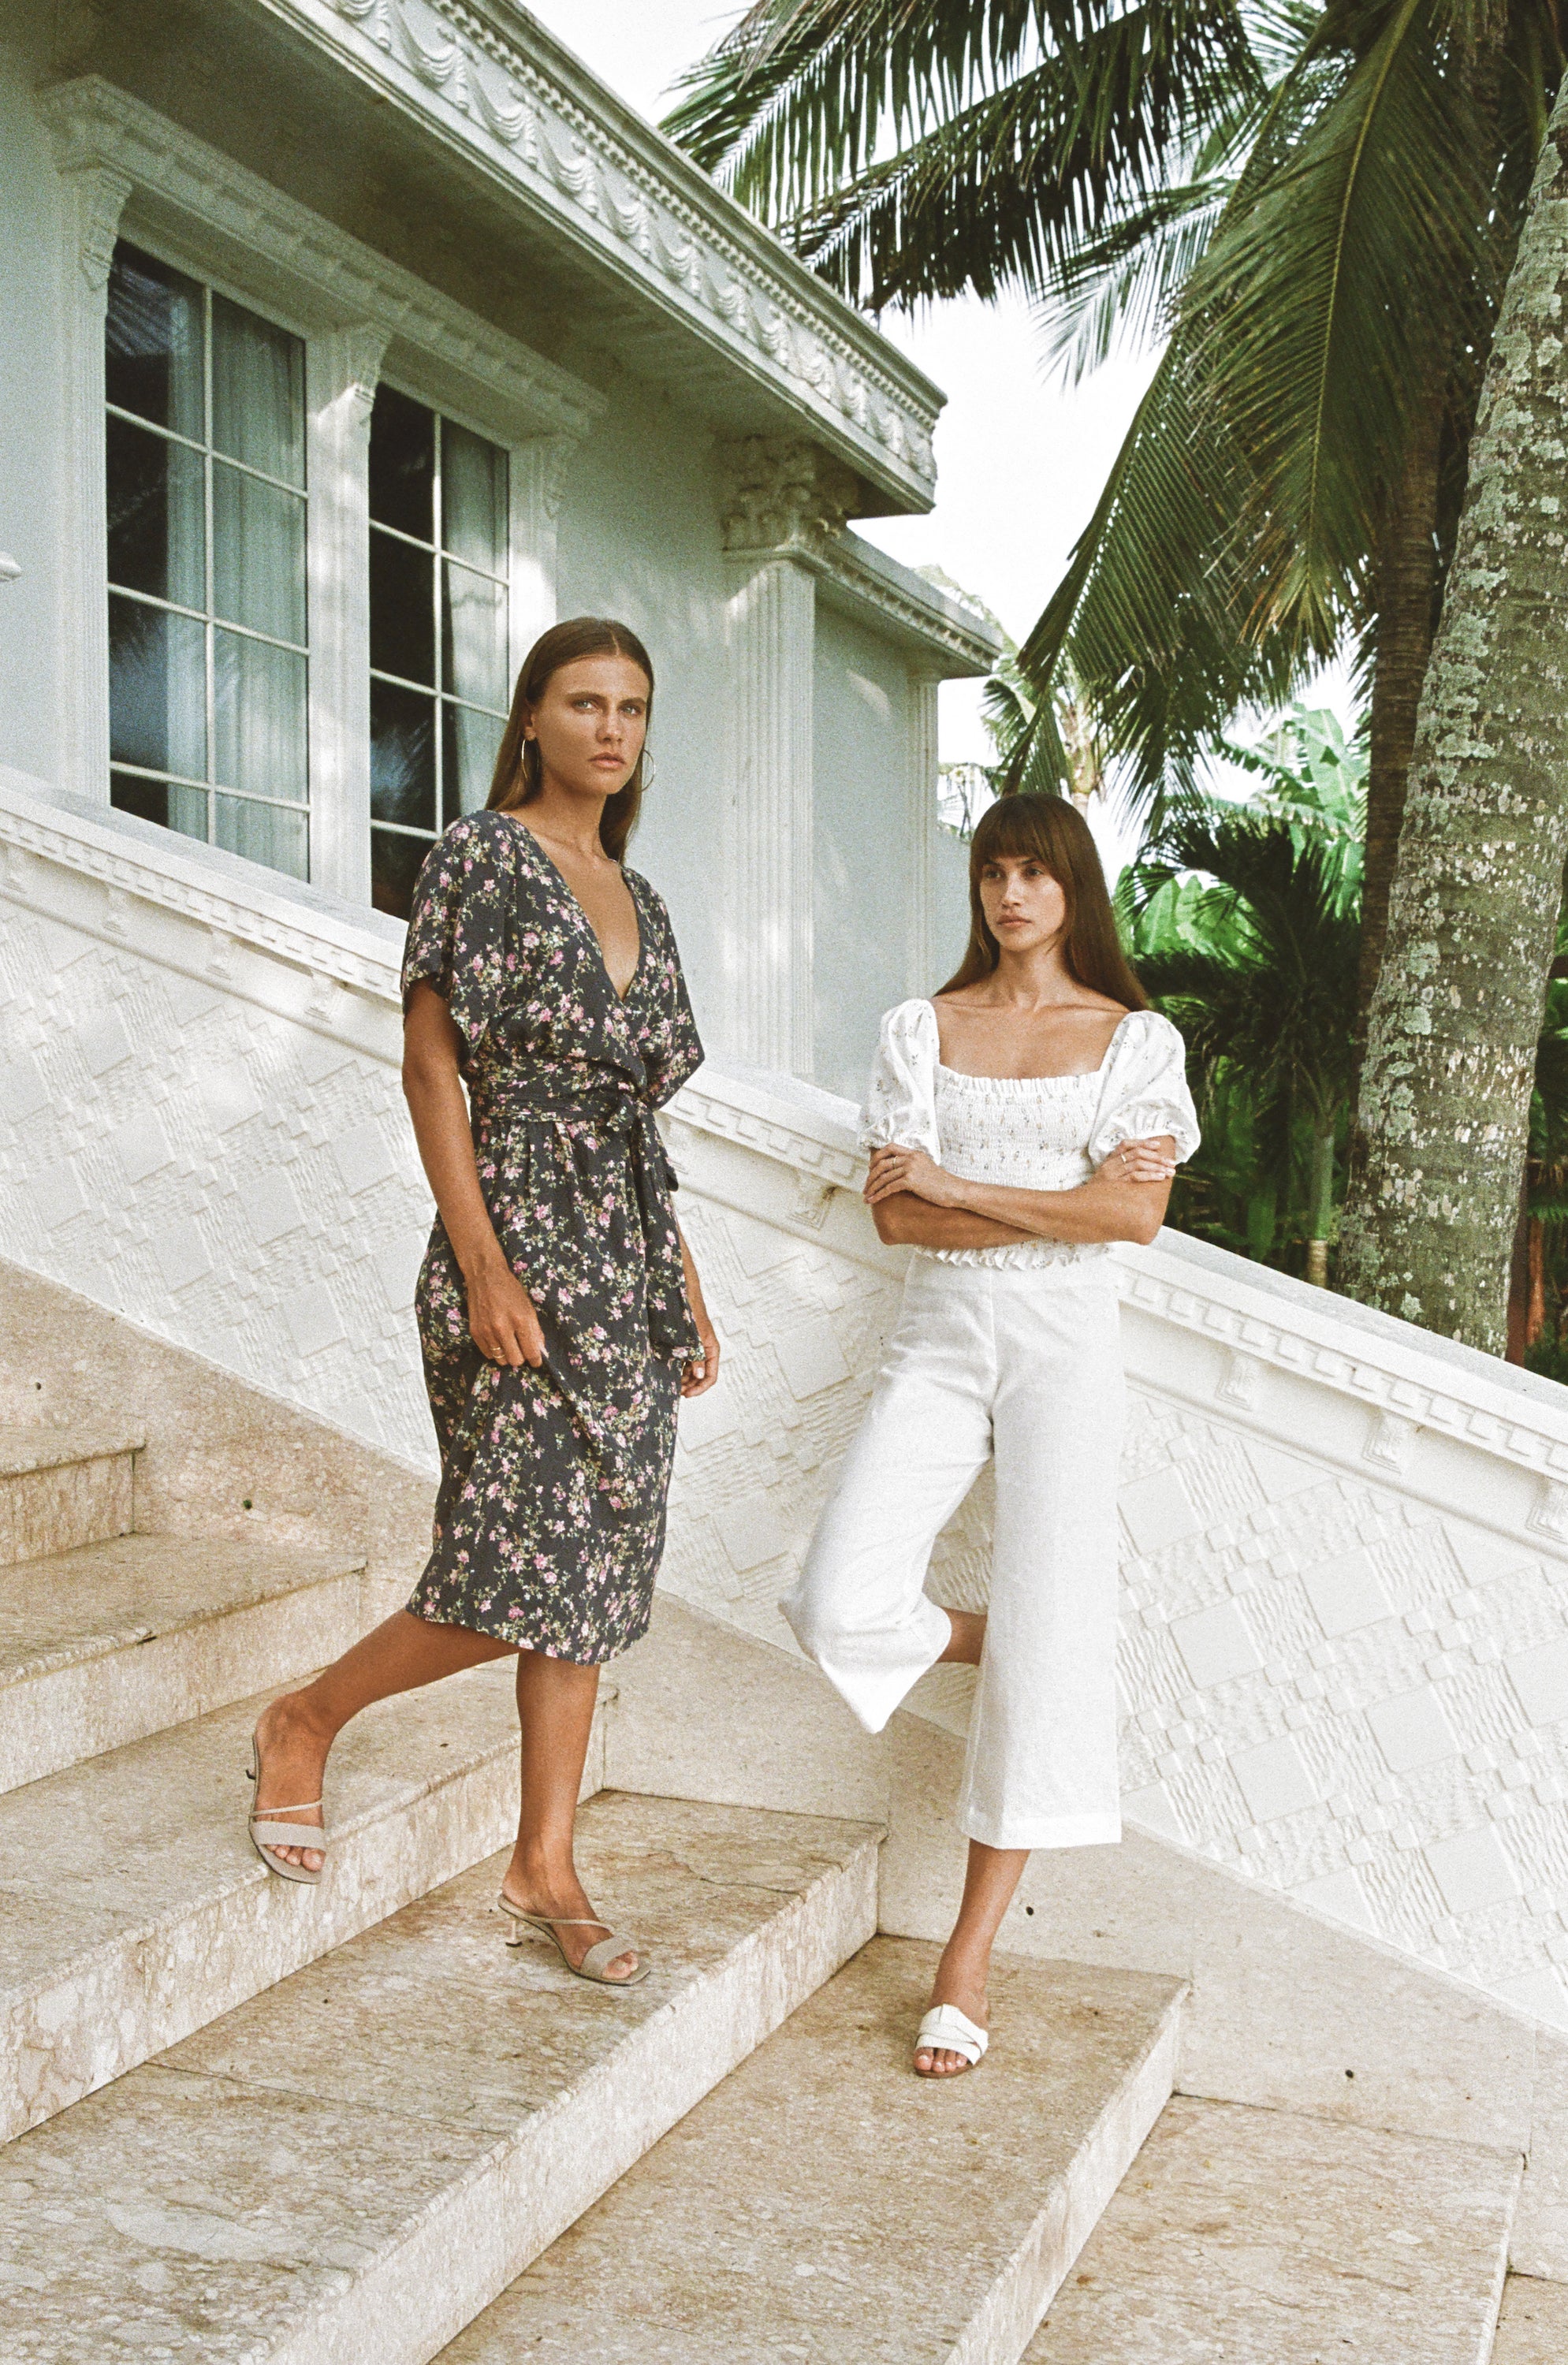 Two women wearing floral print midi dress and white floral top and pants standing on stair steps